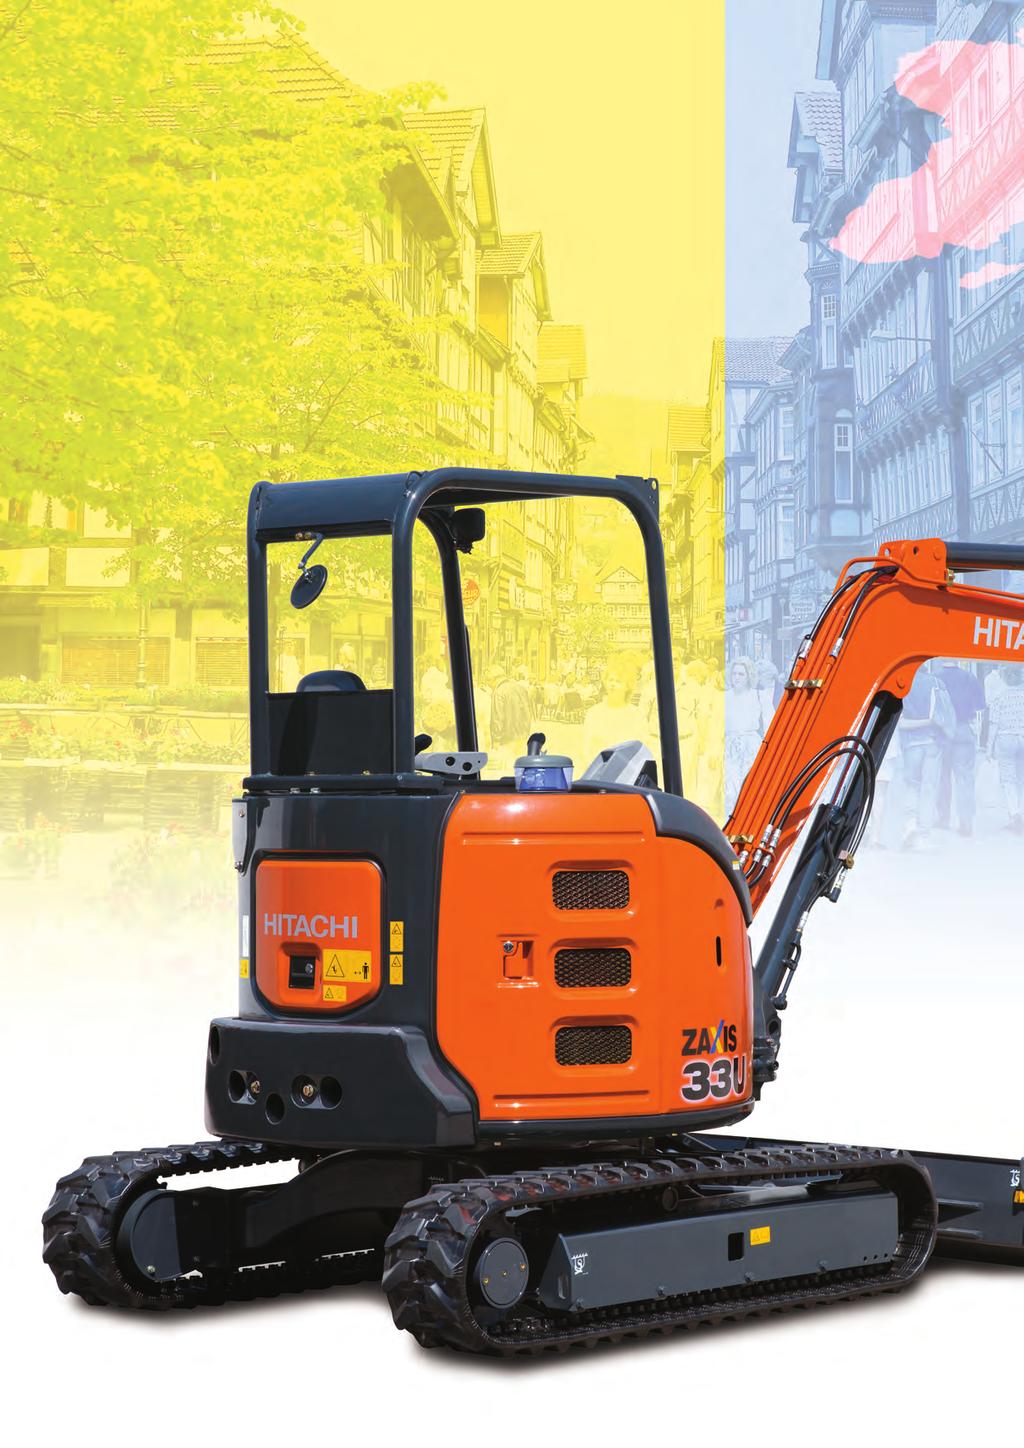 Trustworthy and User-Friendly New Compact Excavators The new series of Hitachi compact excavators has evolved even